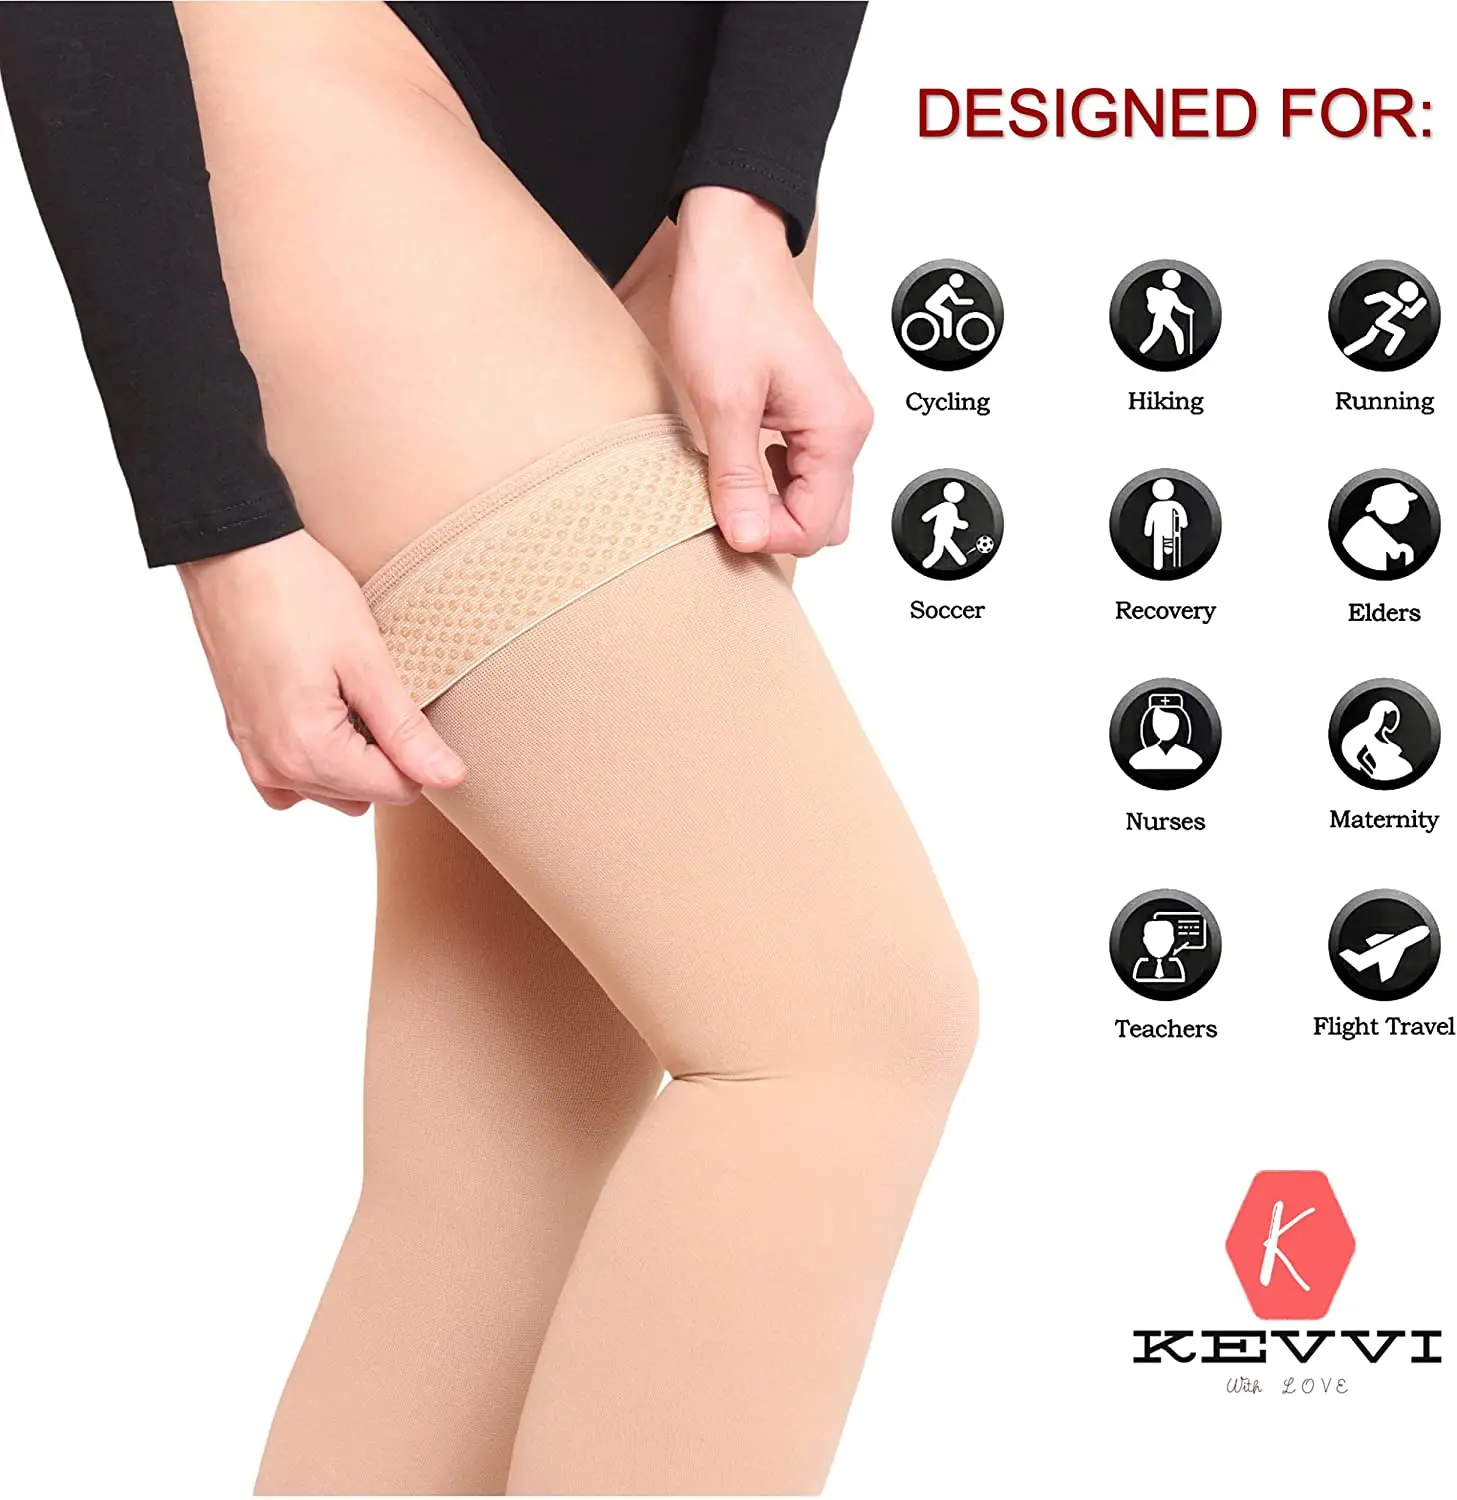 Medical Woman Compression Pantyhose Stockings 20-30 MmHg